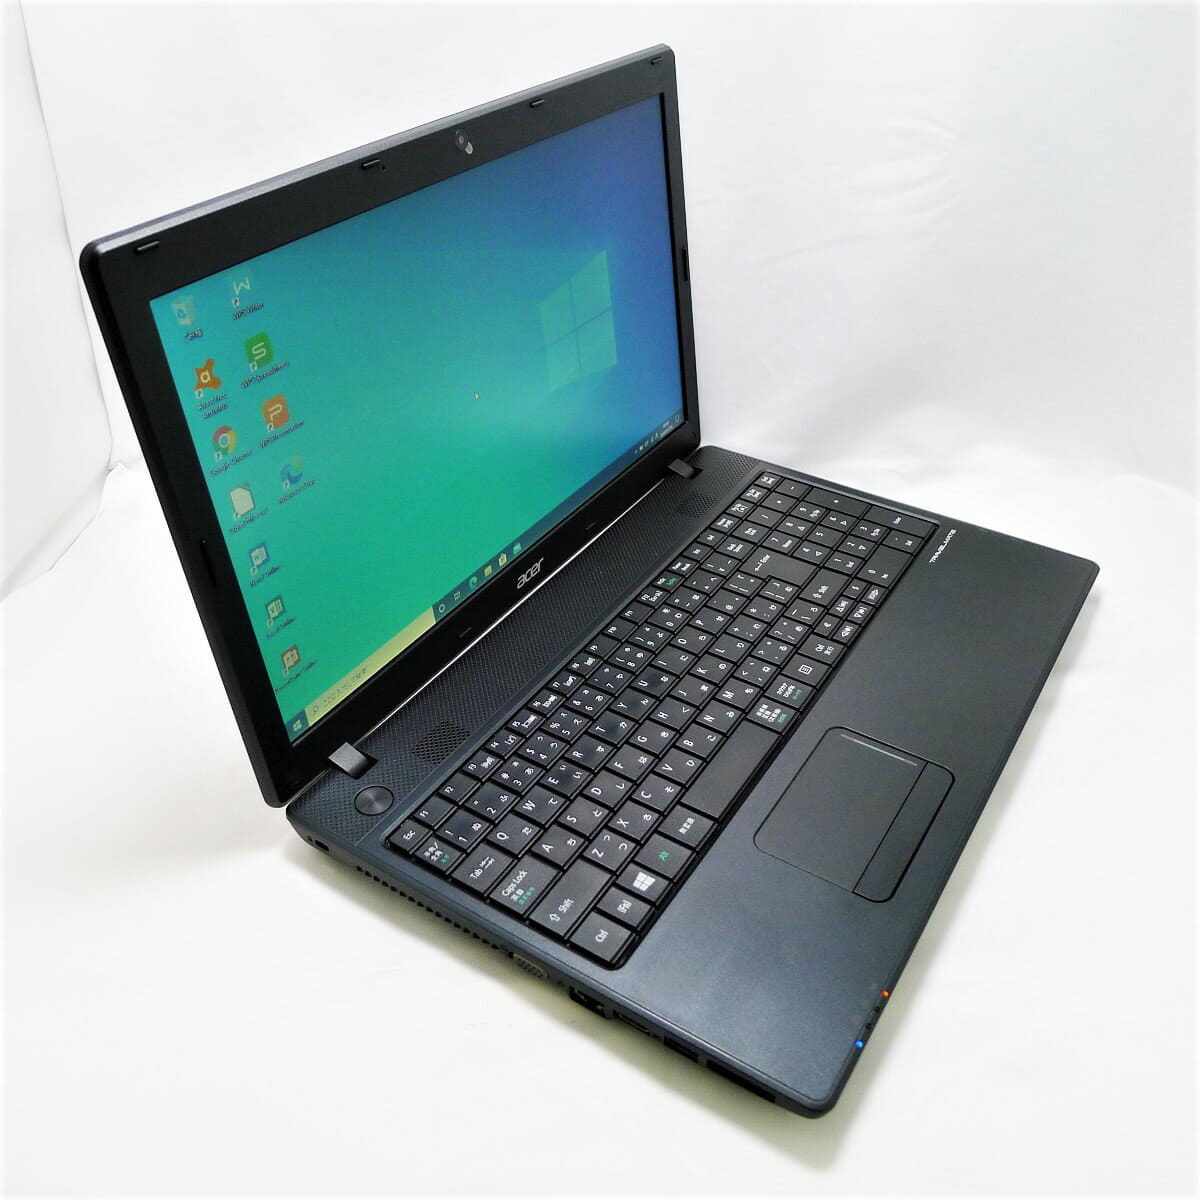 Used]acer TRAVEL MATE P453 i3 8GB SSD2TB DVD-ROM wireless LAN Windows10  64bit WPSOffice 15.6 inches - BE FORWARD Store